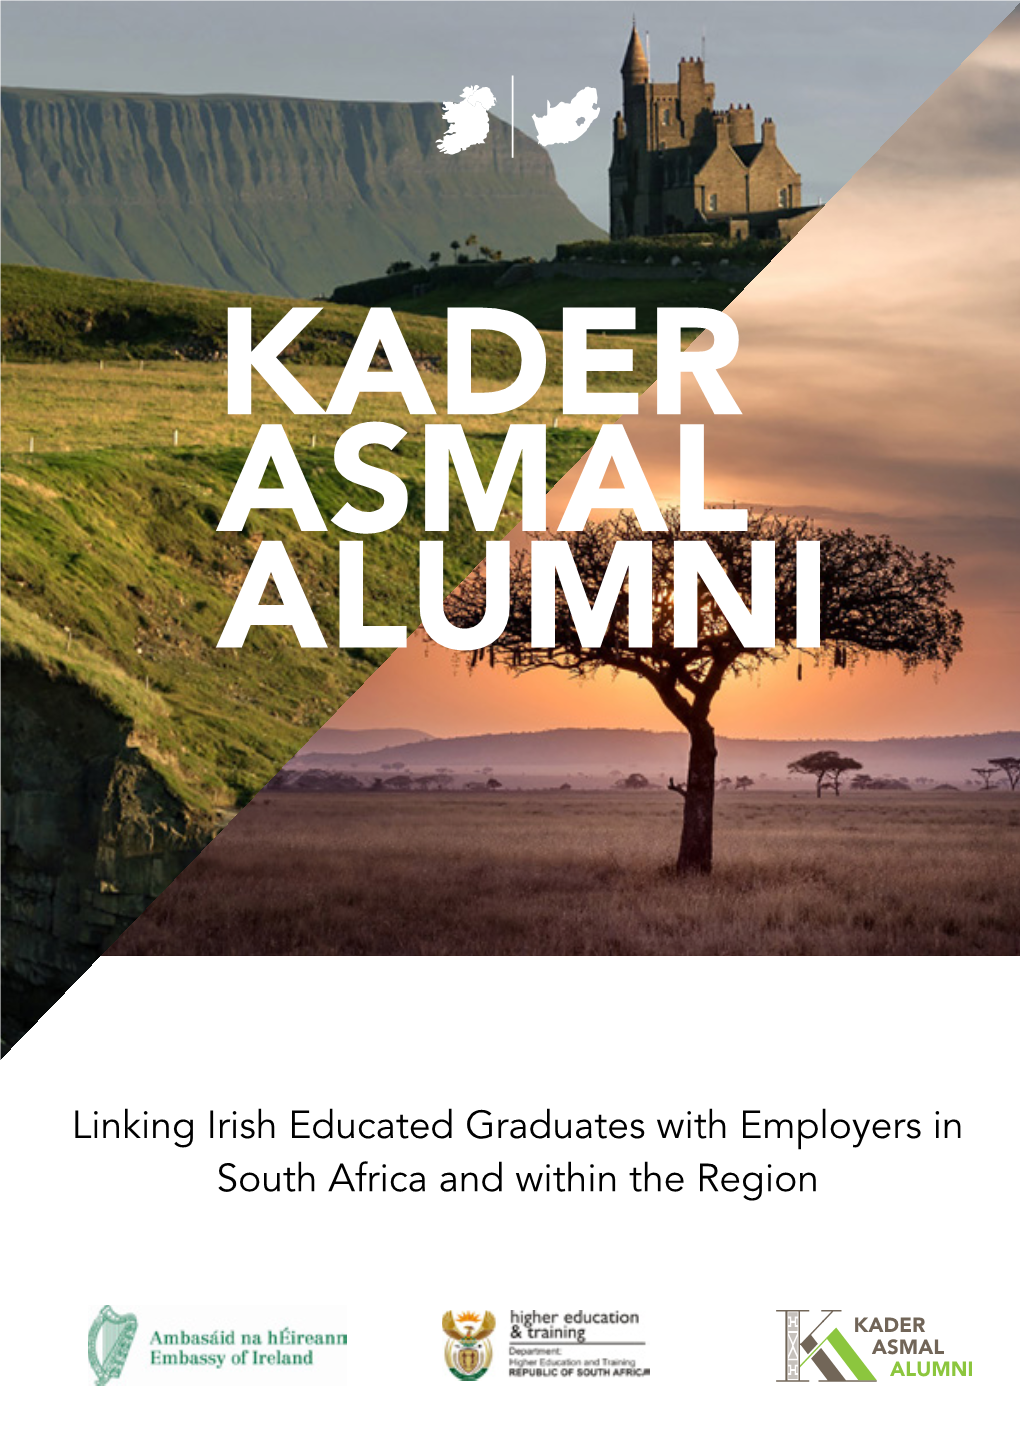 Kader Asmal Alumni Linking Irish Educated Graduates with Employers in South Africa and Within the Region Introduction